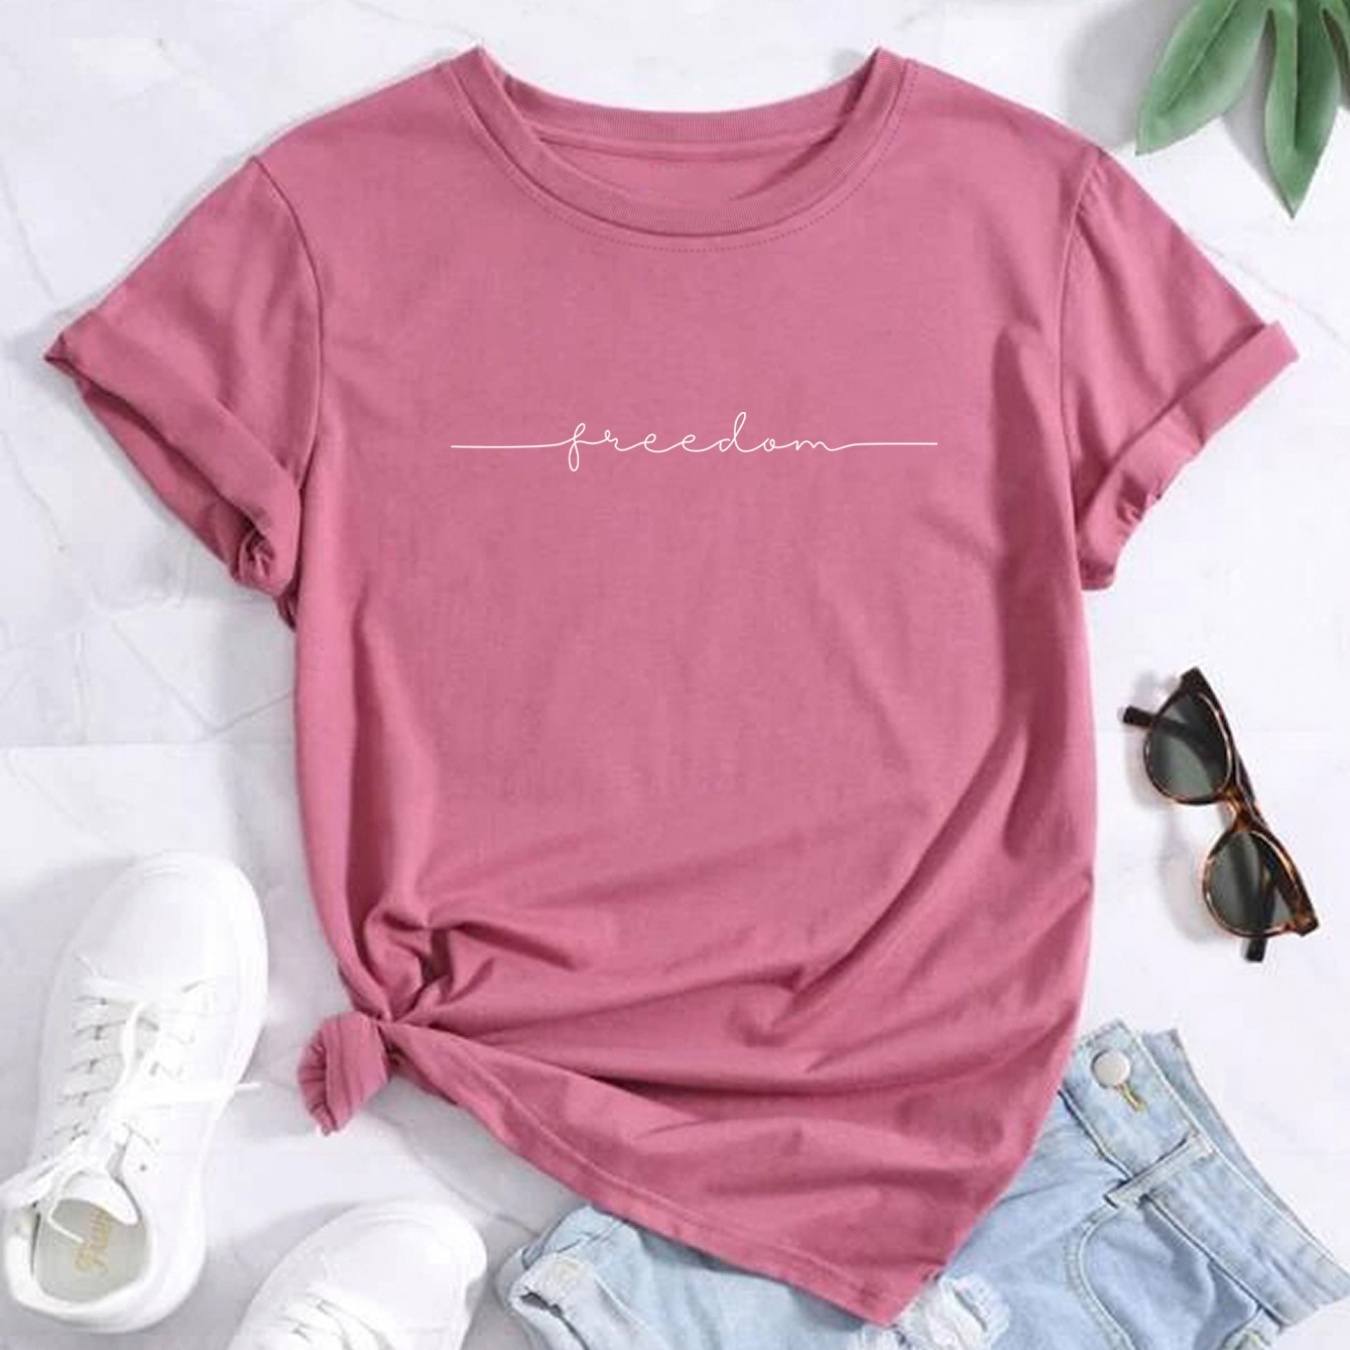 

Freedom Print Crew Neck T-shirt, Casual Short Sleeve T-shirt For Spring & Summer, Women's Clothing